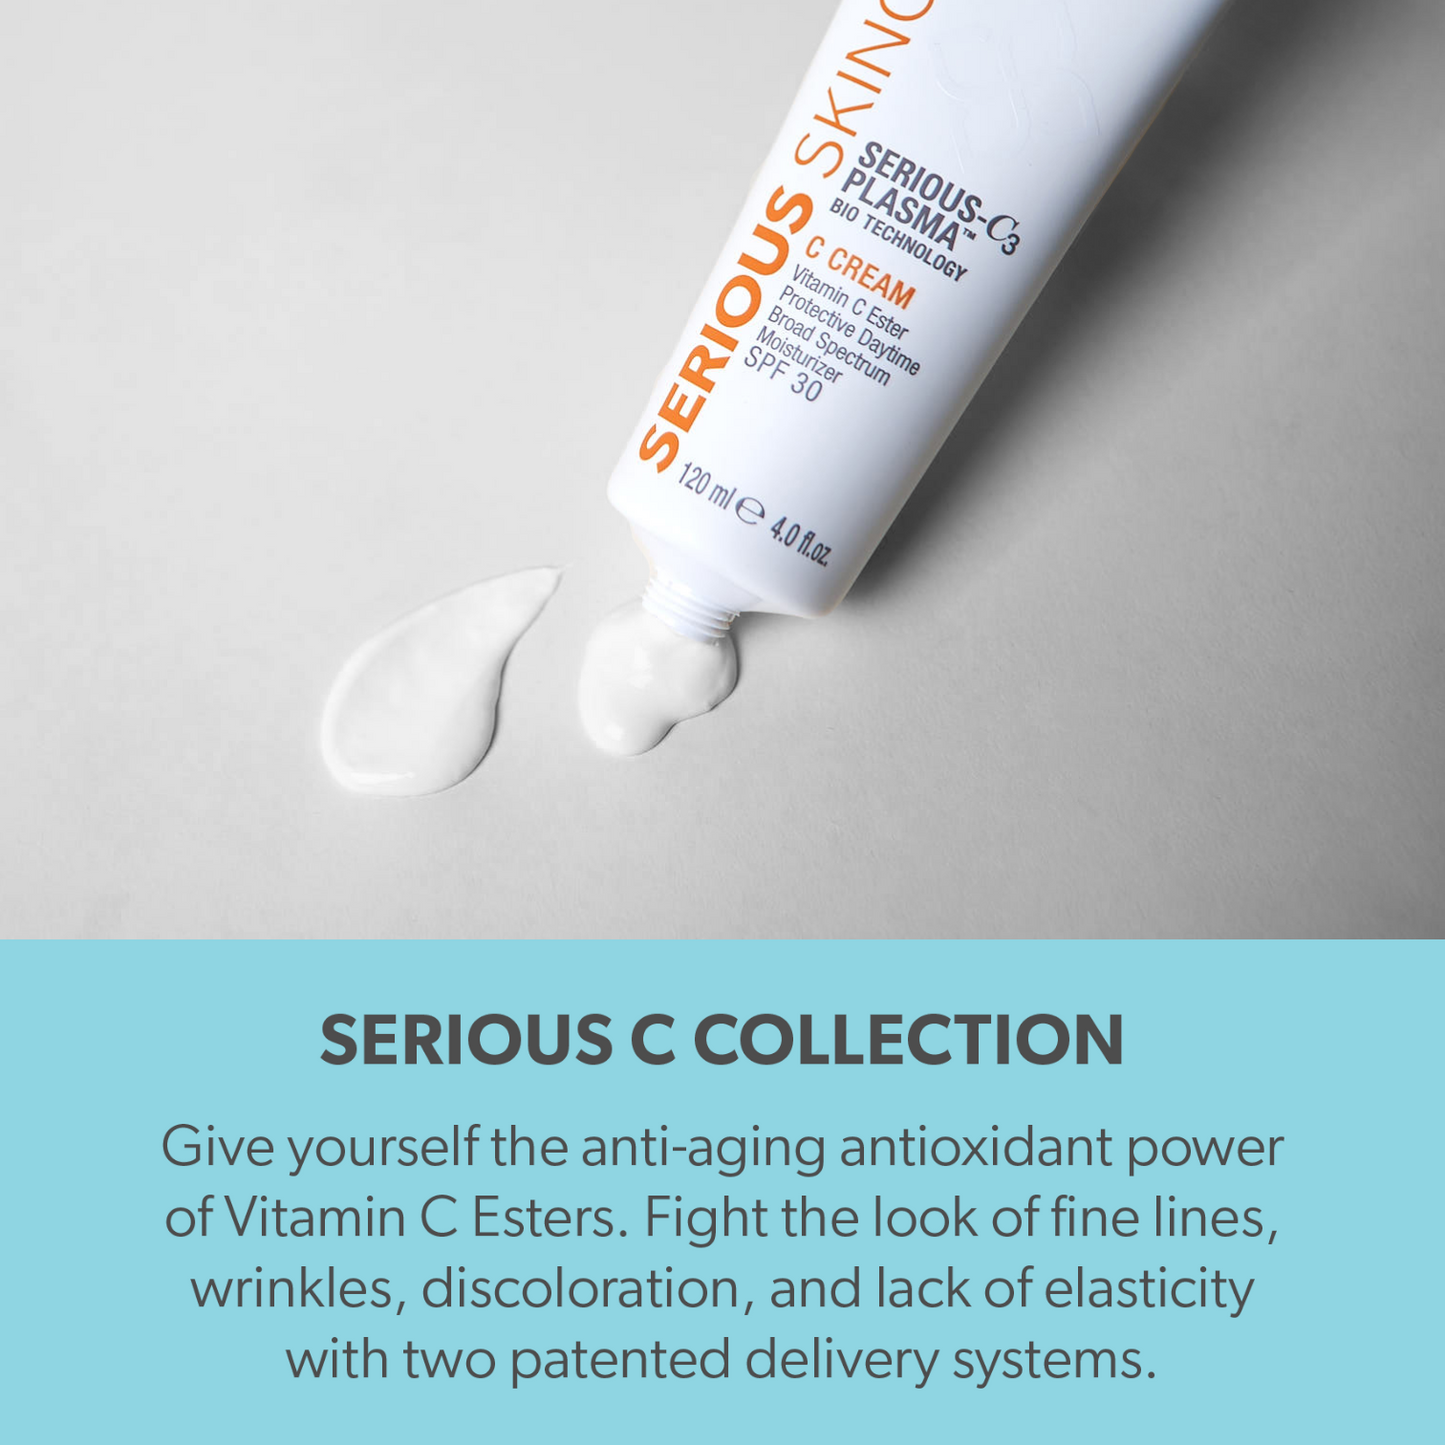 The serious c3 product collection by Serious Skincare